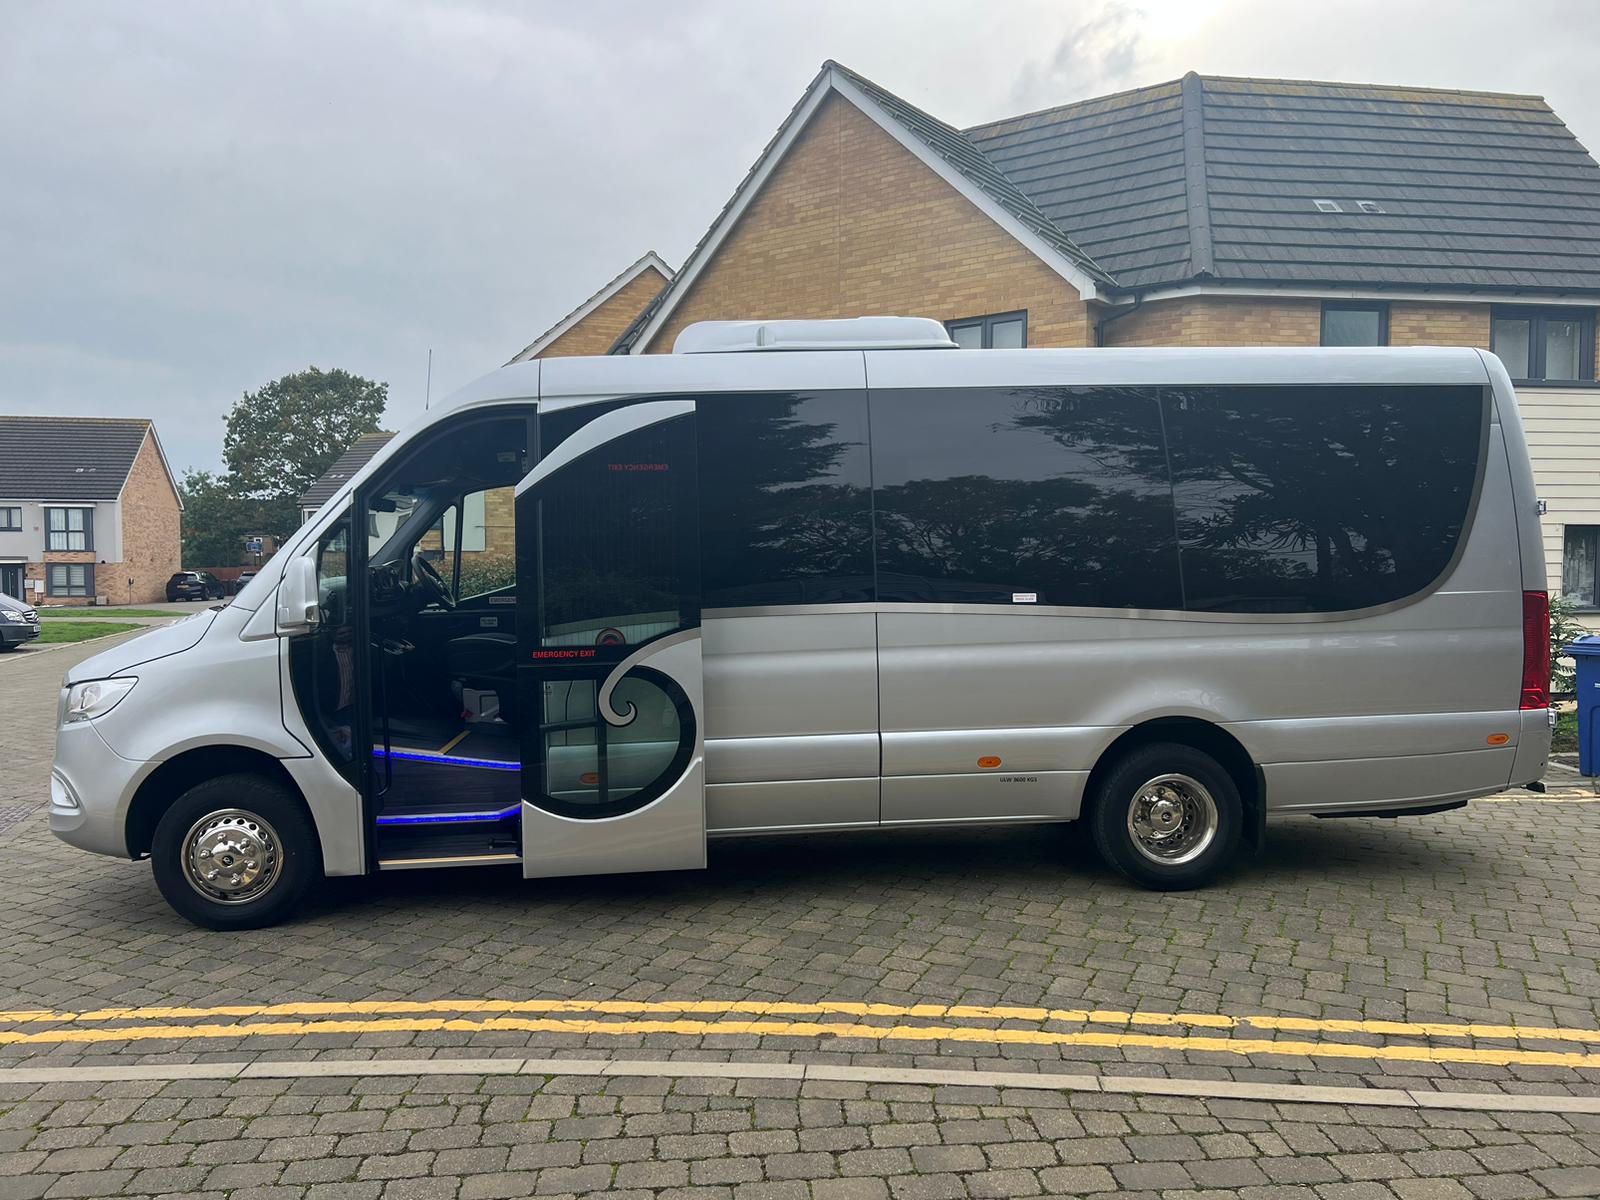 Essential Things to Know Before Hiring a Minibus in London